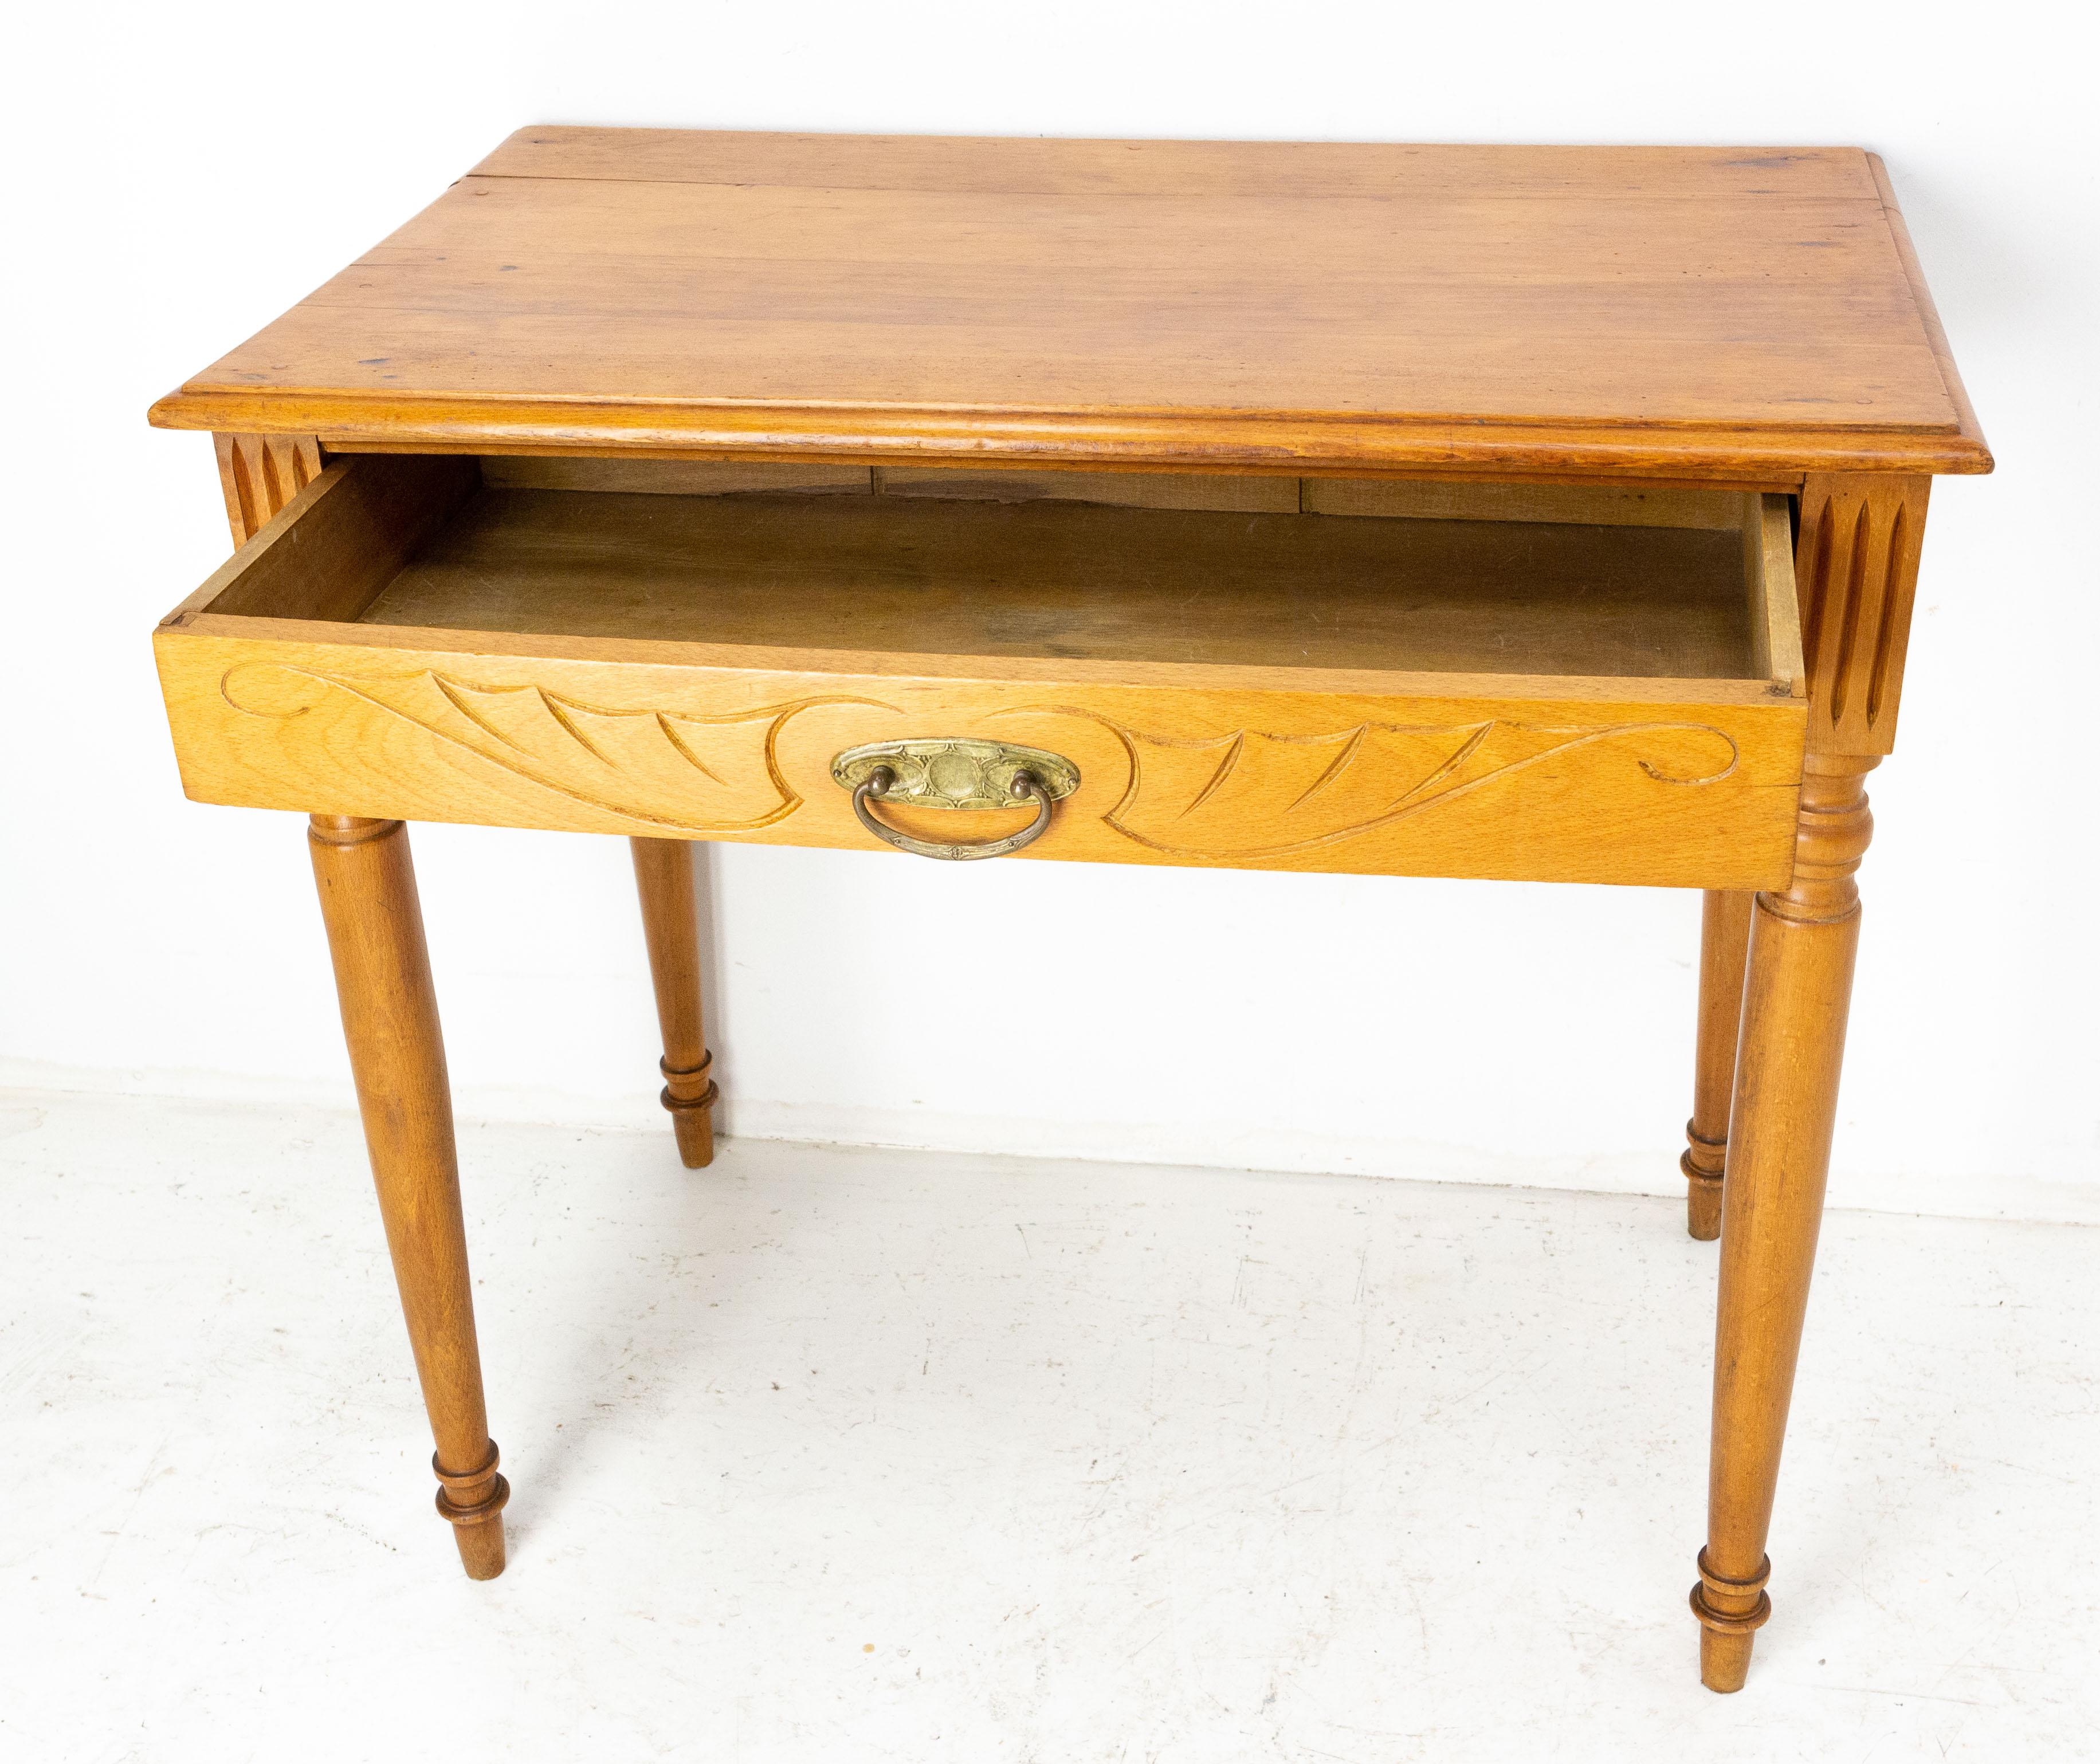 French Art Nouveau Beech Writing Table, Desk or Side Table, circa 1900 For Sale 1